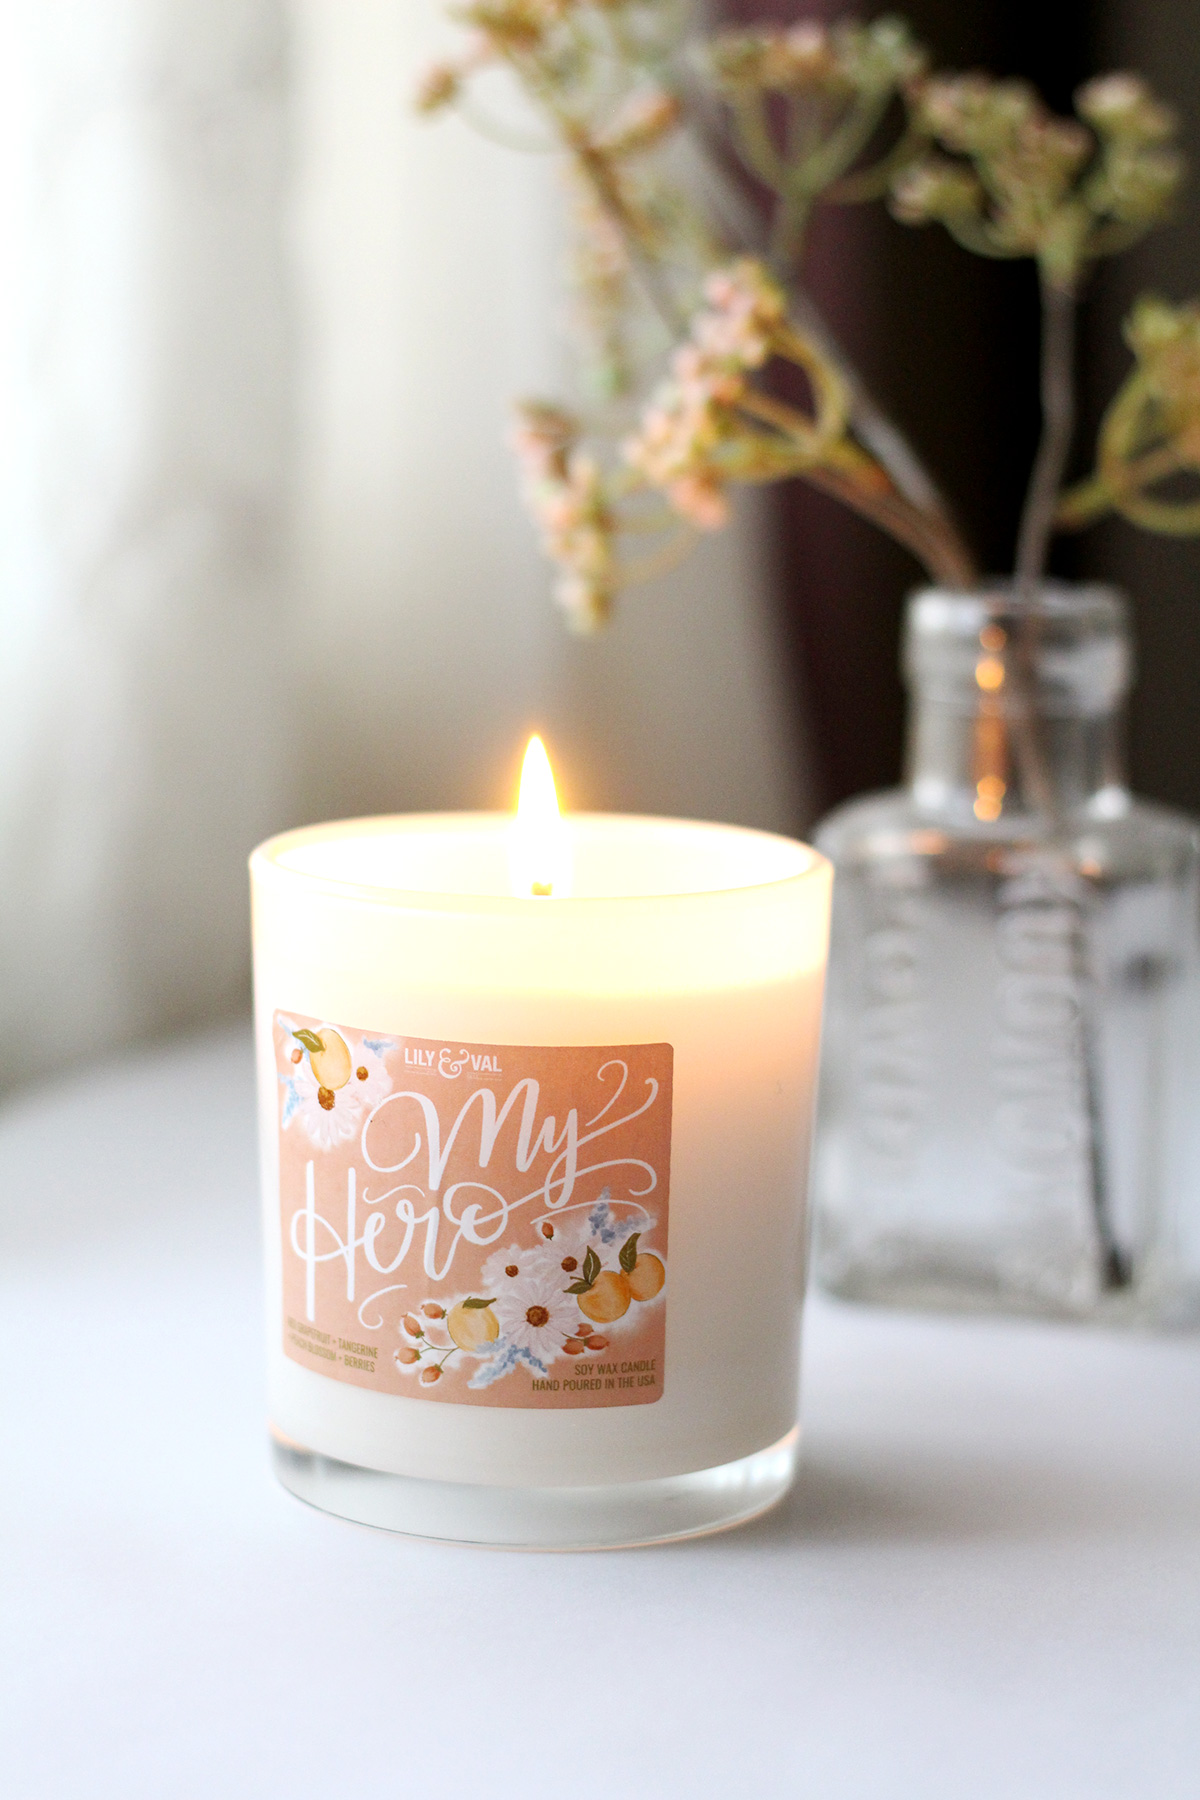 Limited Edition Soy Wax Candles Are Here For Mother's Day